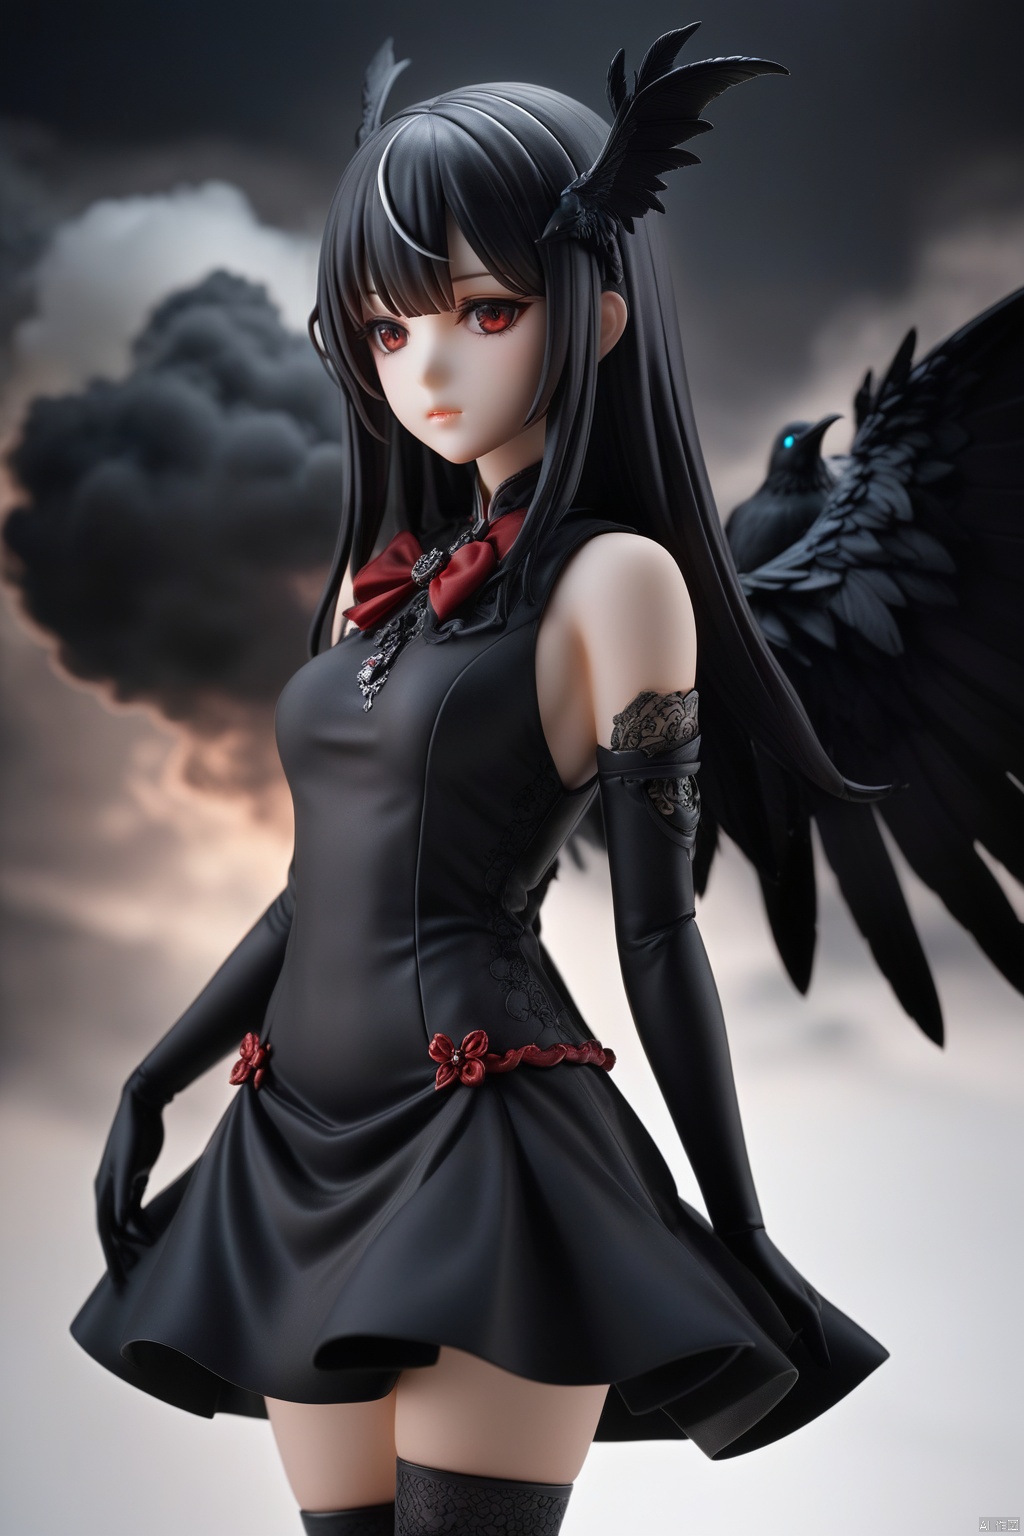 (masterpiece),(highestquality),Anime,(extremelydetailed),figurine,contour deepening beautiful detailed glow,(beautiful detailed eyes), (1 girl:1.1), ((Bana)), large top sleeves, Floating black ashes, Beautiful and detailed black, red moon, ((The black clouds)), (black Wings) , a black cloudy sky, burning, black dress, (beautiful detailed eyes), black expressionless, beautiful detailed white gloves, (crow), bat, (floating black cloud:1.5),white and black hair, disheveled hair, long bangs, hairs between eyes, black knee-highs, black ribbon, white bowties, midriff,{{{half closed eyes}}},((Black fog)), Red eyes, (black smoke), complex pattern, ((Black feathers floating in the air)), (((arms behind back))), robot,, figure